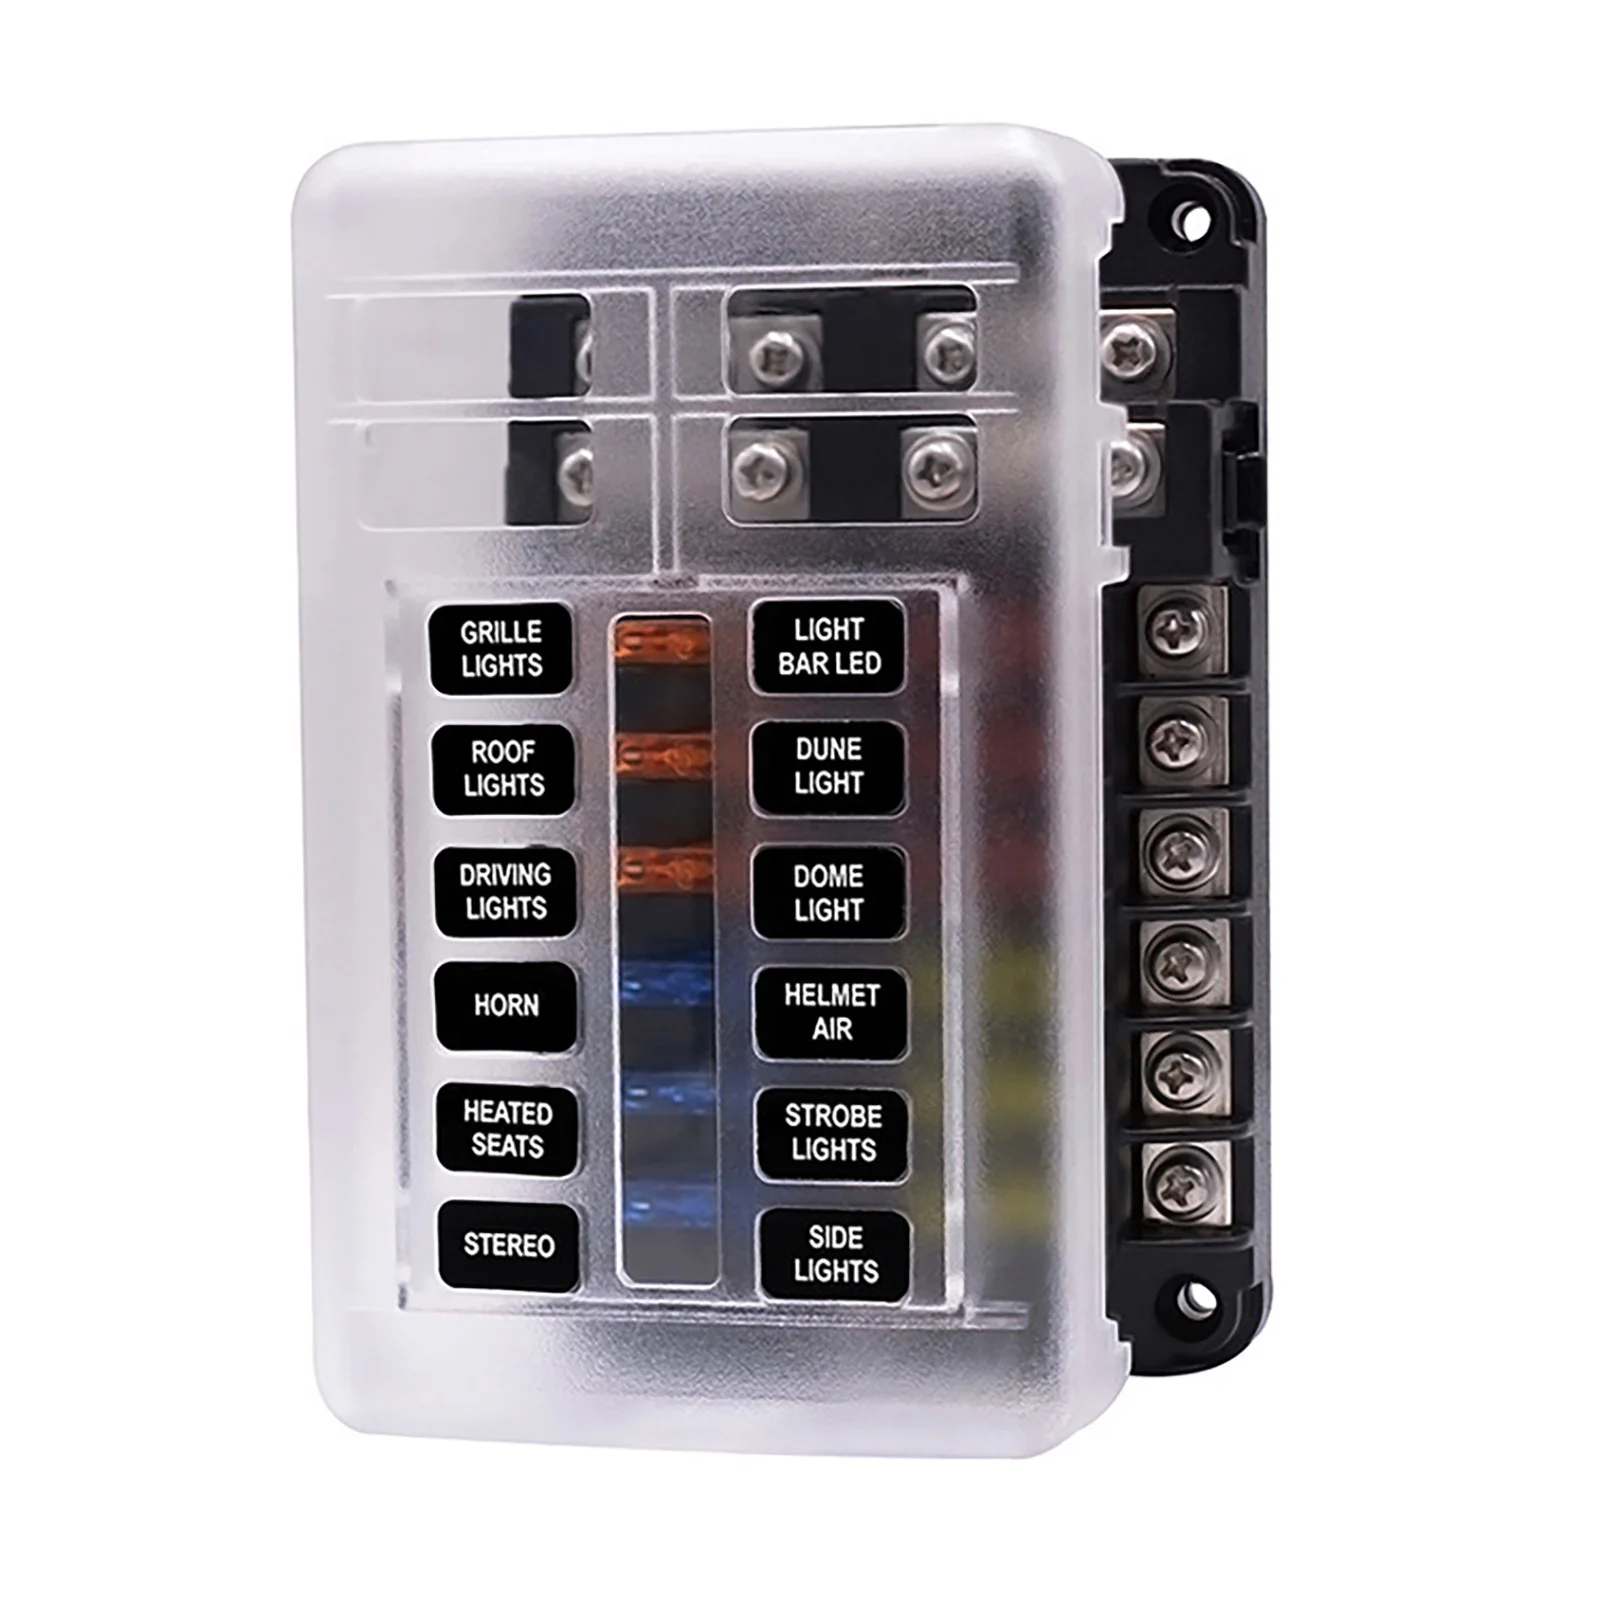 

12 Way Blade Fuse Block 12 Circuit ATC/ATO Fuse Box Holder With LED Indicator Waterpoof Cover For Automotive Truck Boat